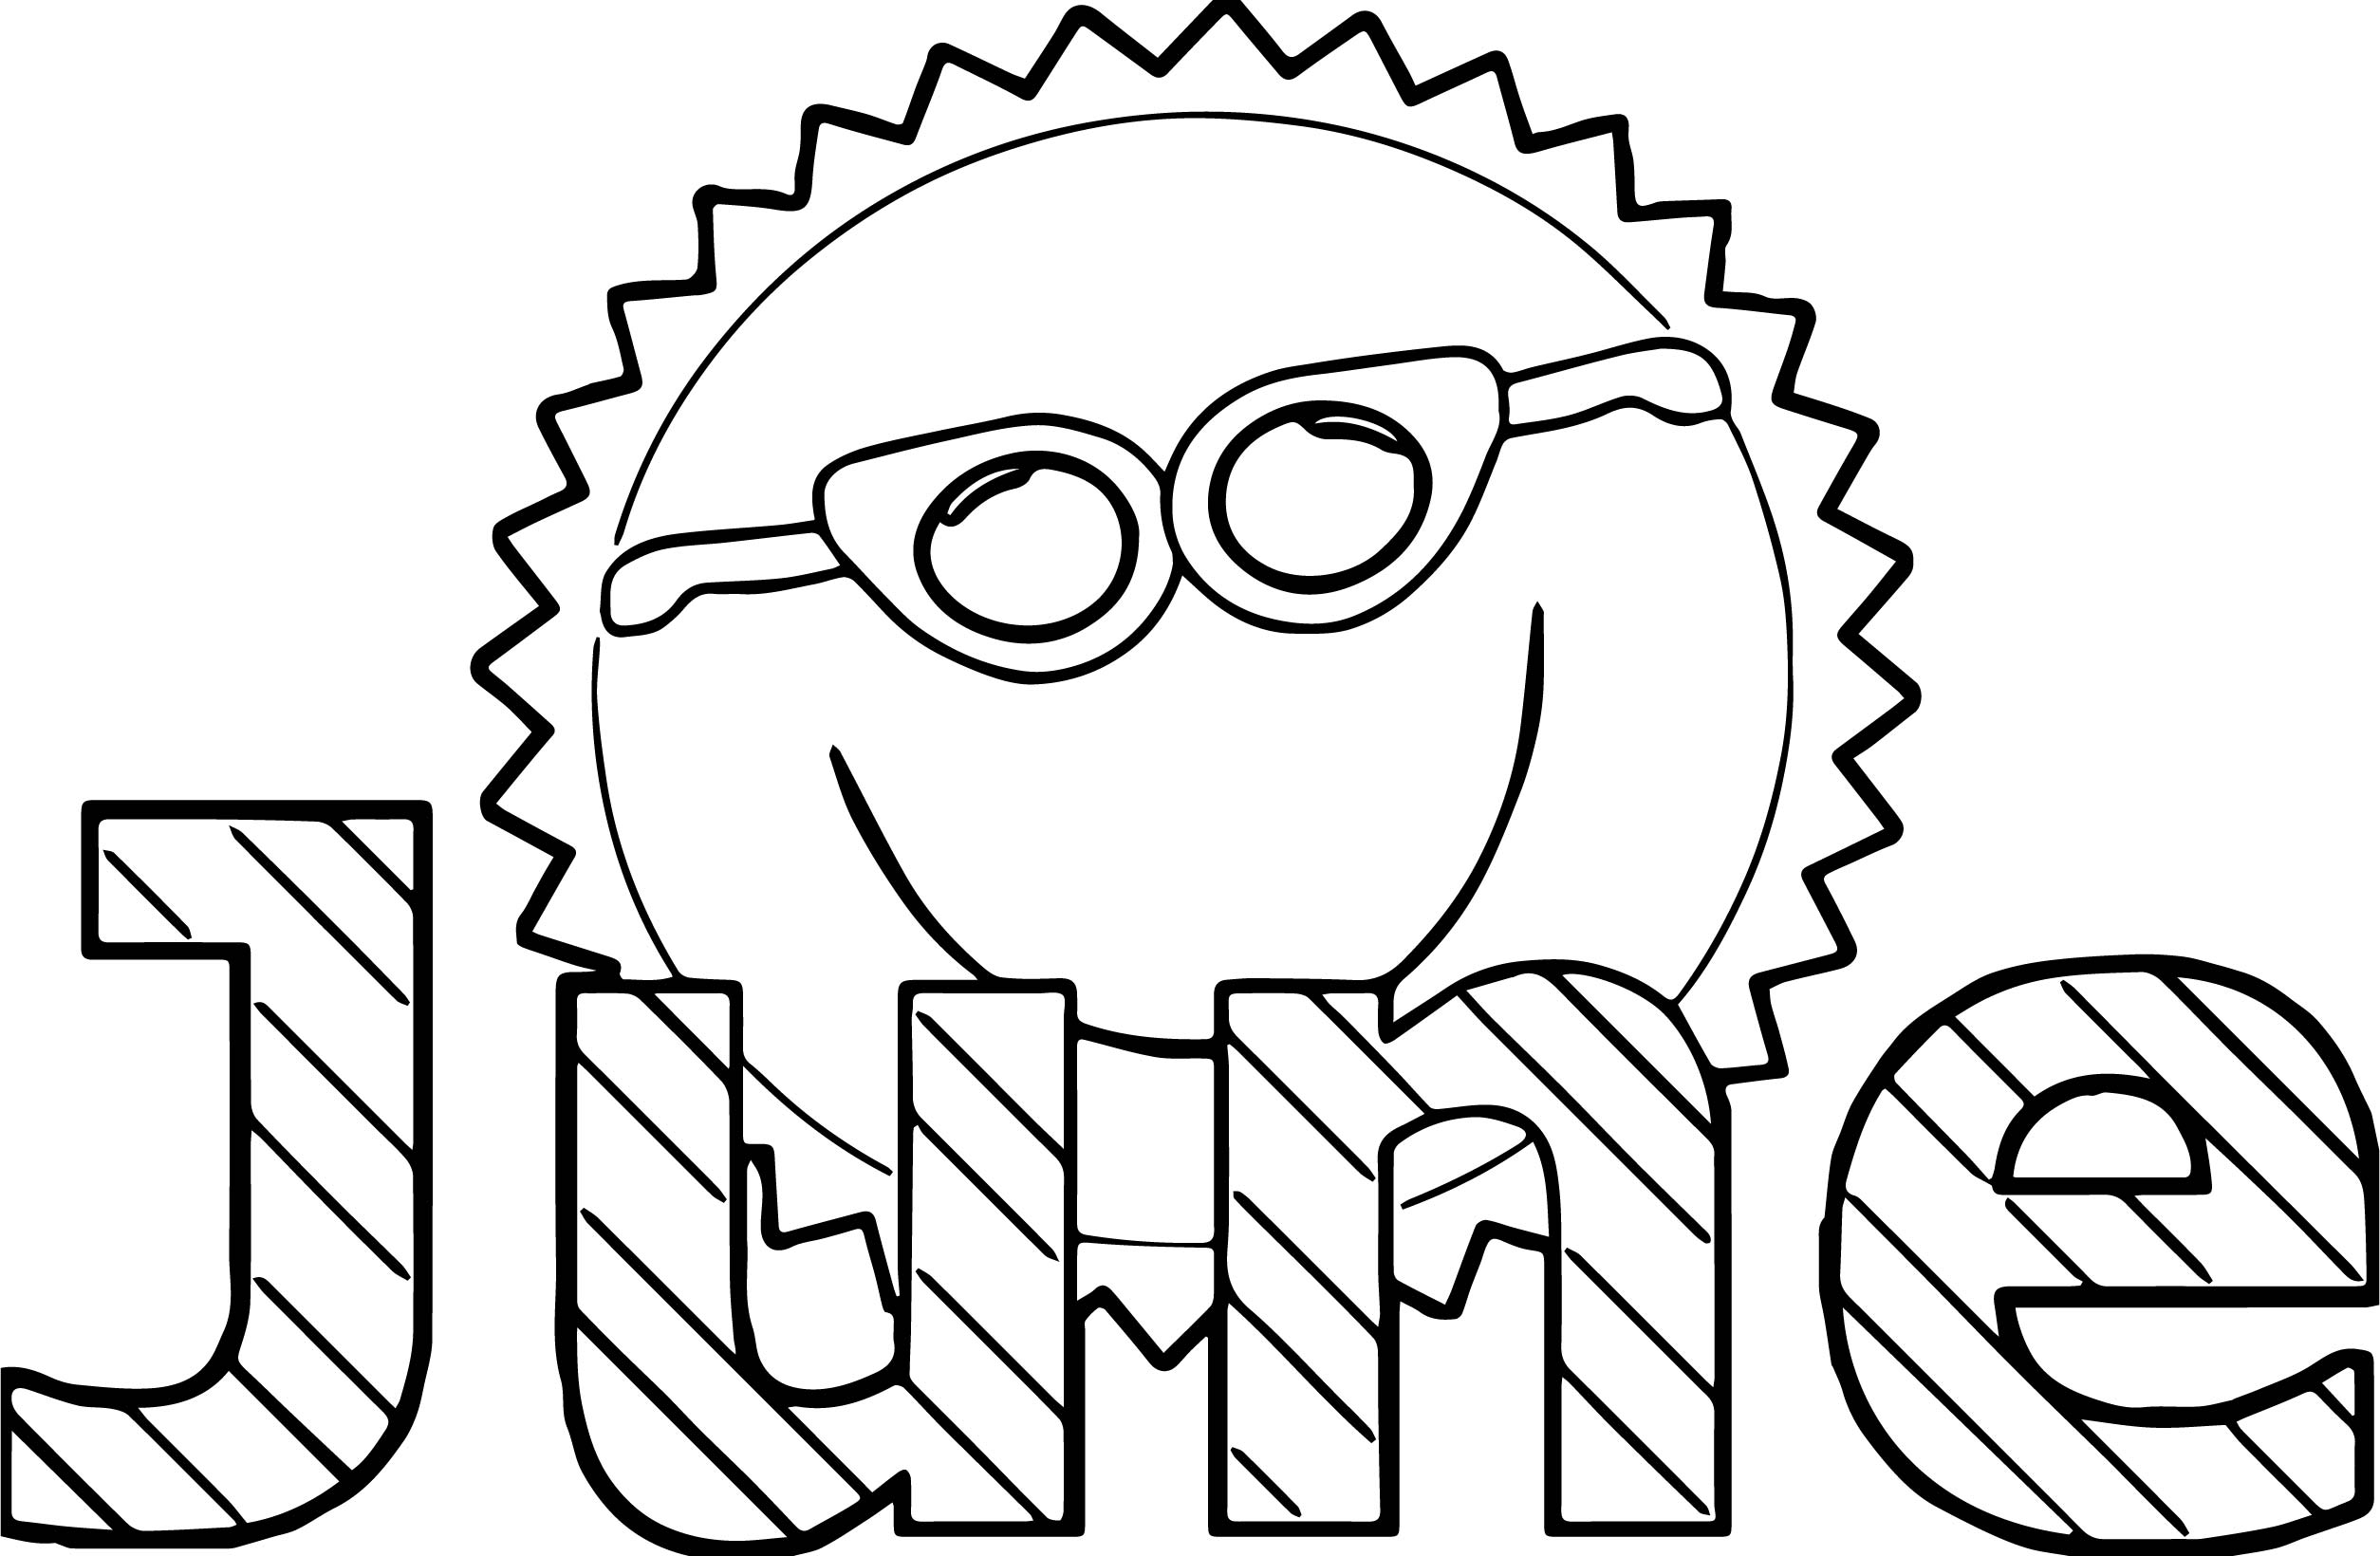 Summer Sun June Coloring Page Wecoloringpage